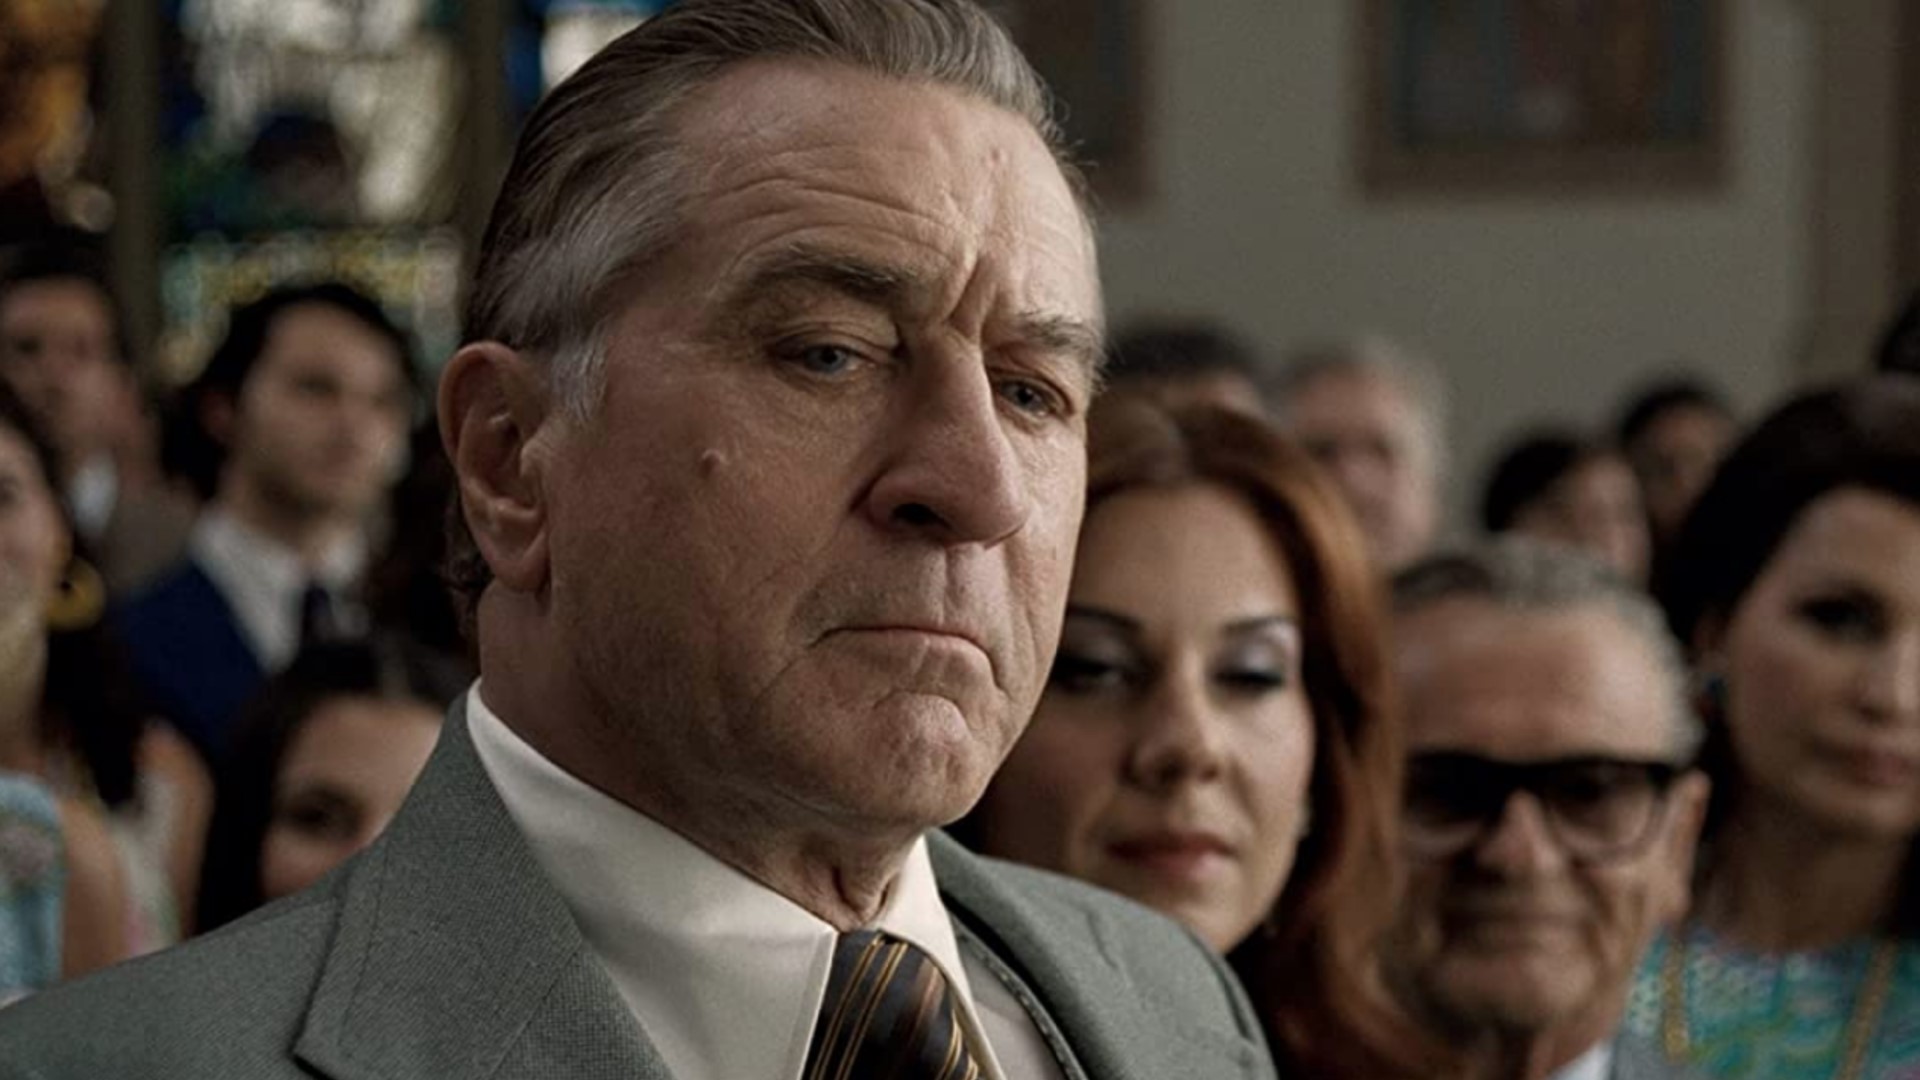 <p>The actor is another great gastronomy entrepreneur. He is a partner in a Japanese haute cuisine restaurant in Miami, which is part of the 'Nobu' chain run by one of the best sushi chefs in the world, Nobu Matsuhisa. Madonna and Jennifer Lopez are frequent customers!</p> <p>Image: De Niro in 'The Irishman' / Netflix</p>